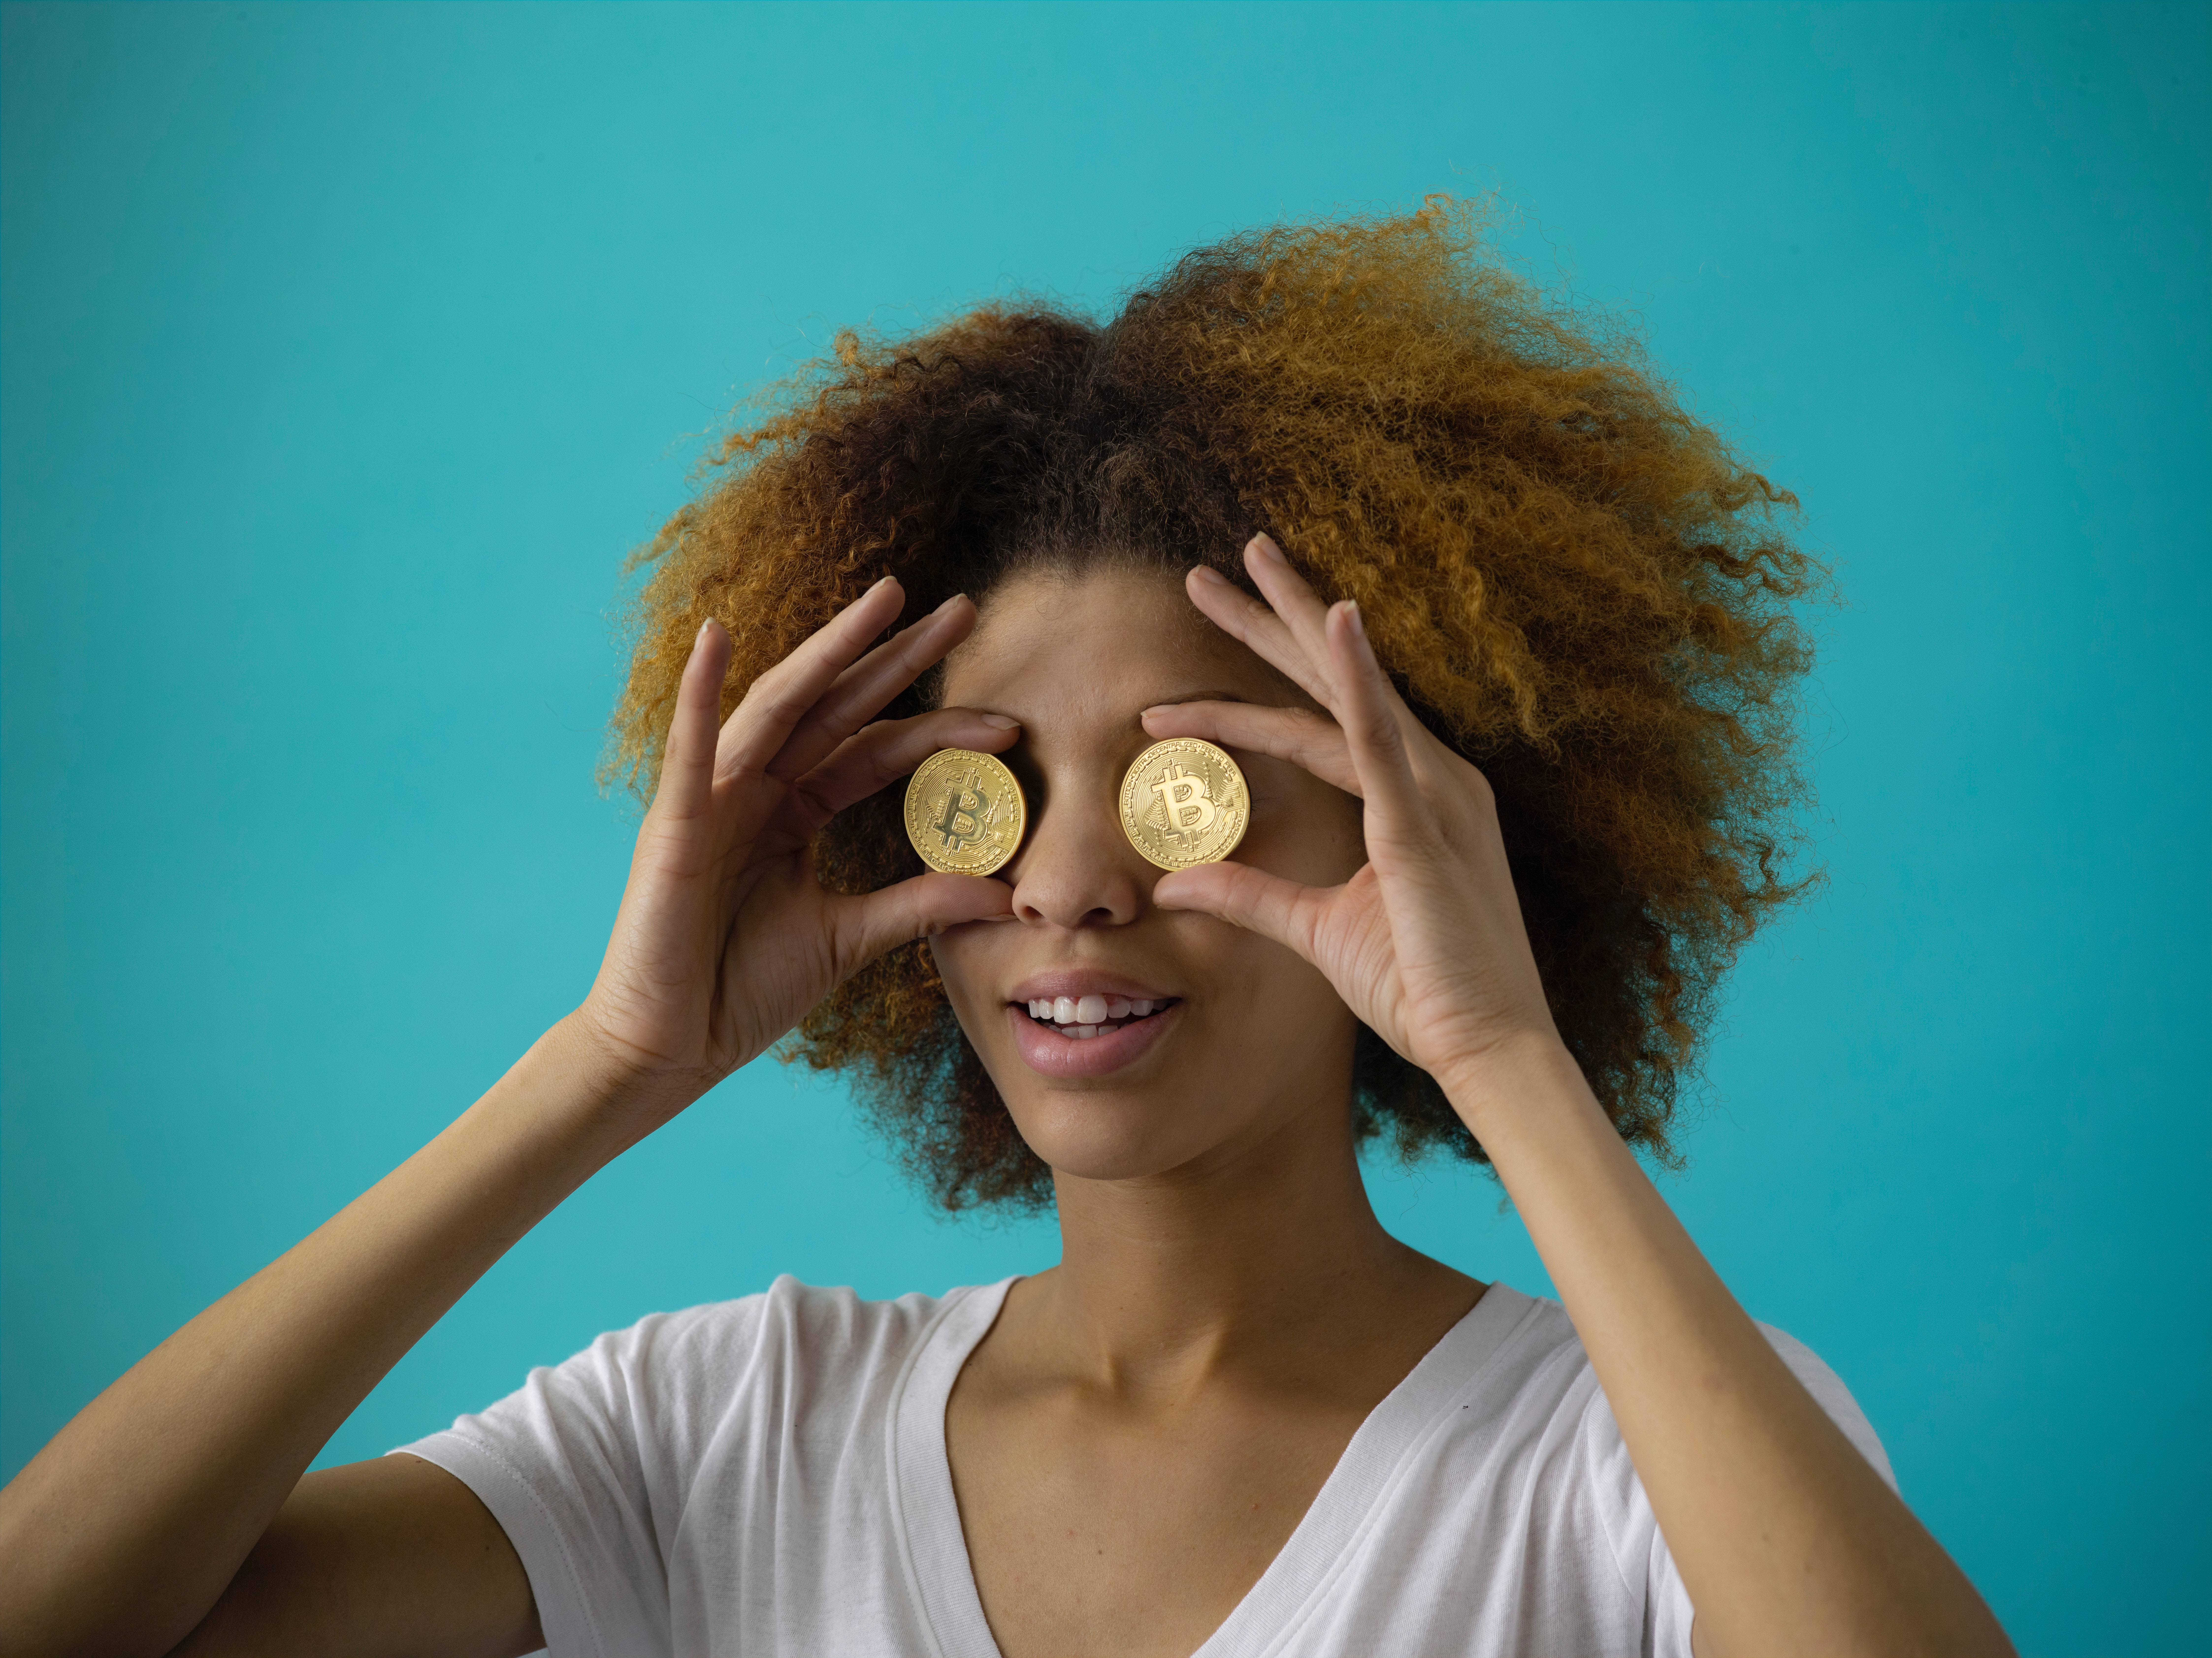 A women with two money coins over both her eyes. The background is blue.